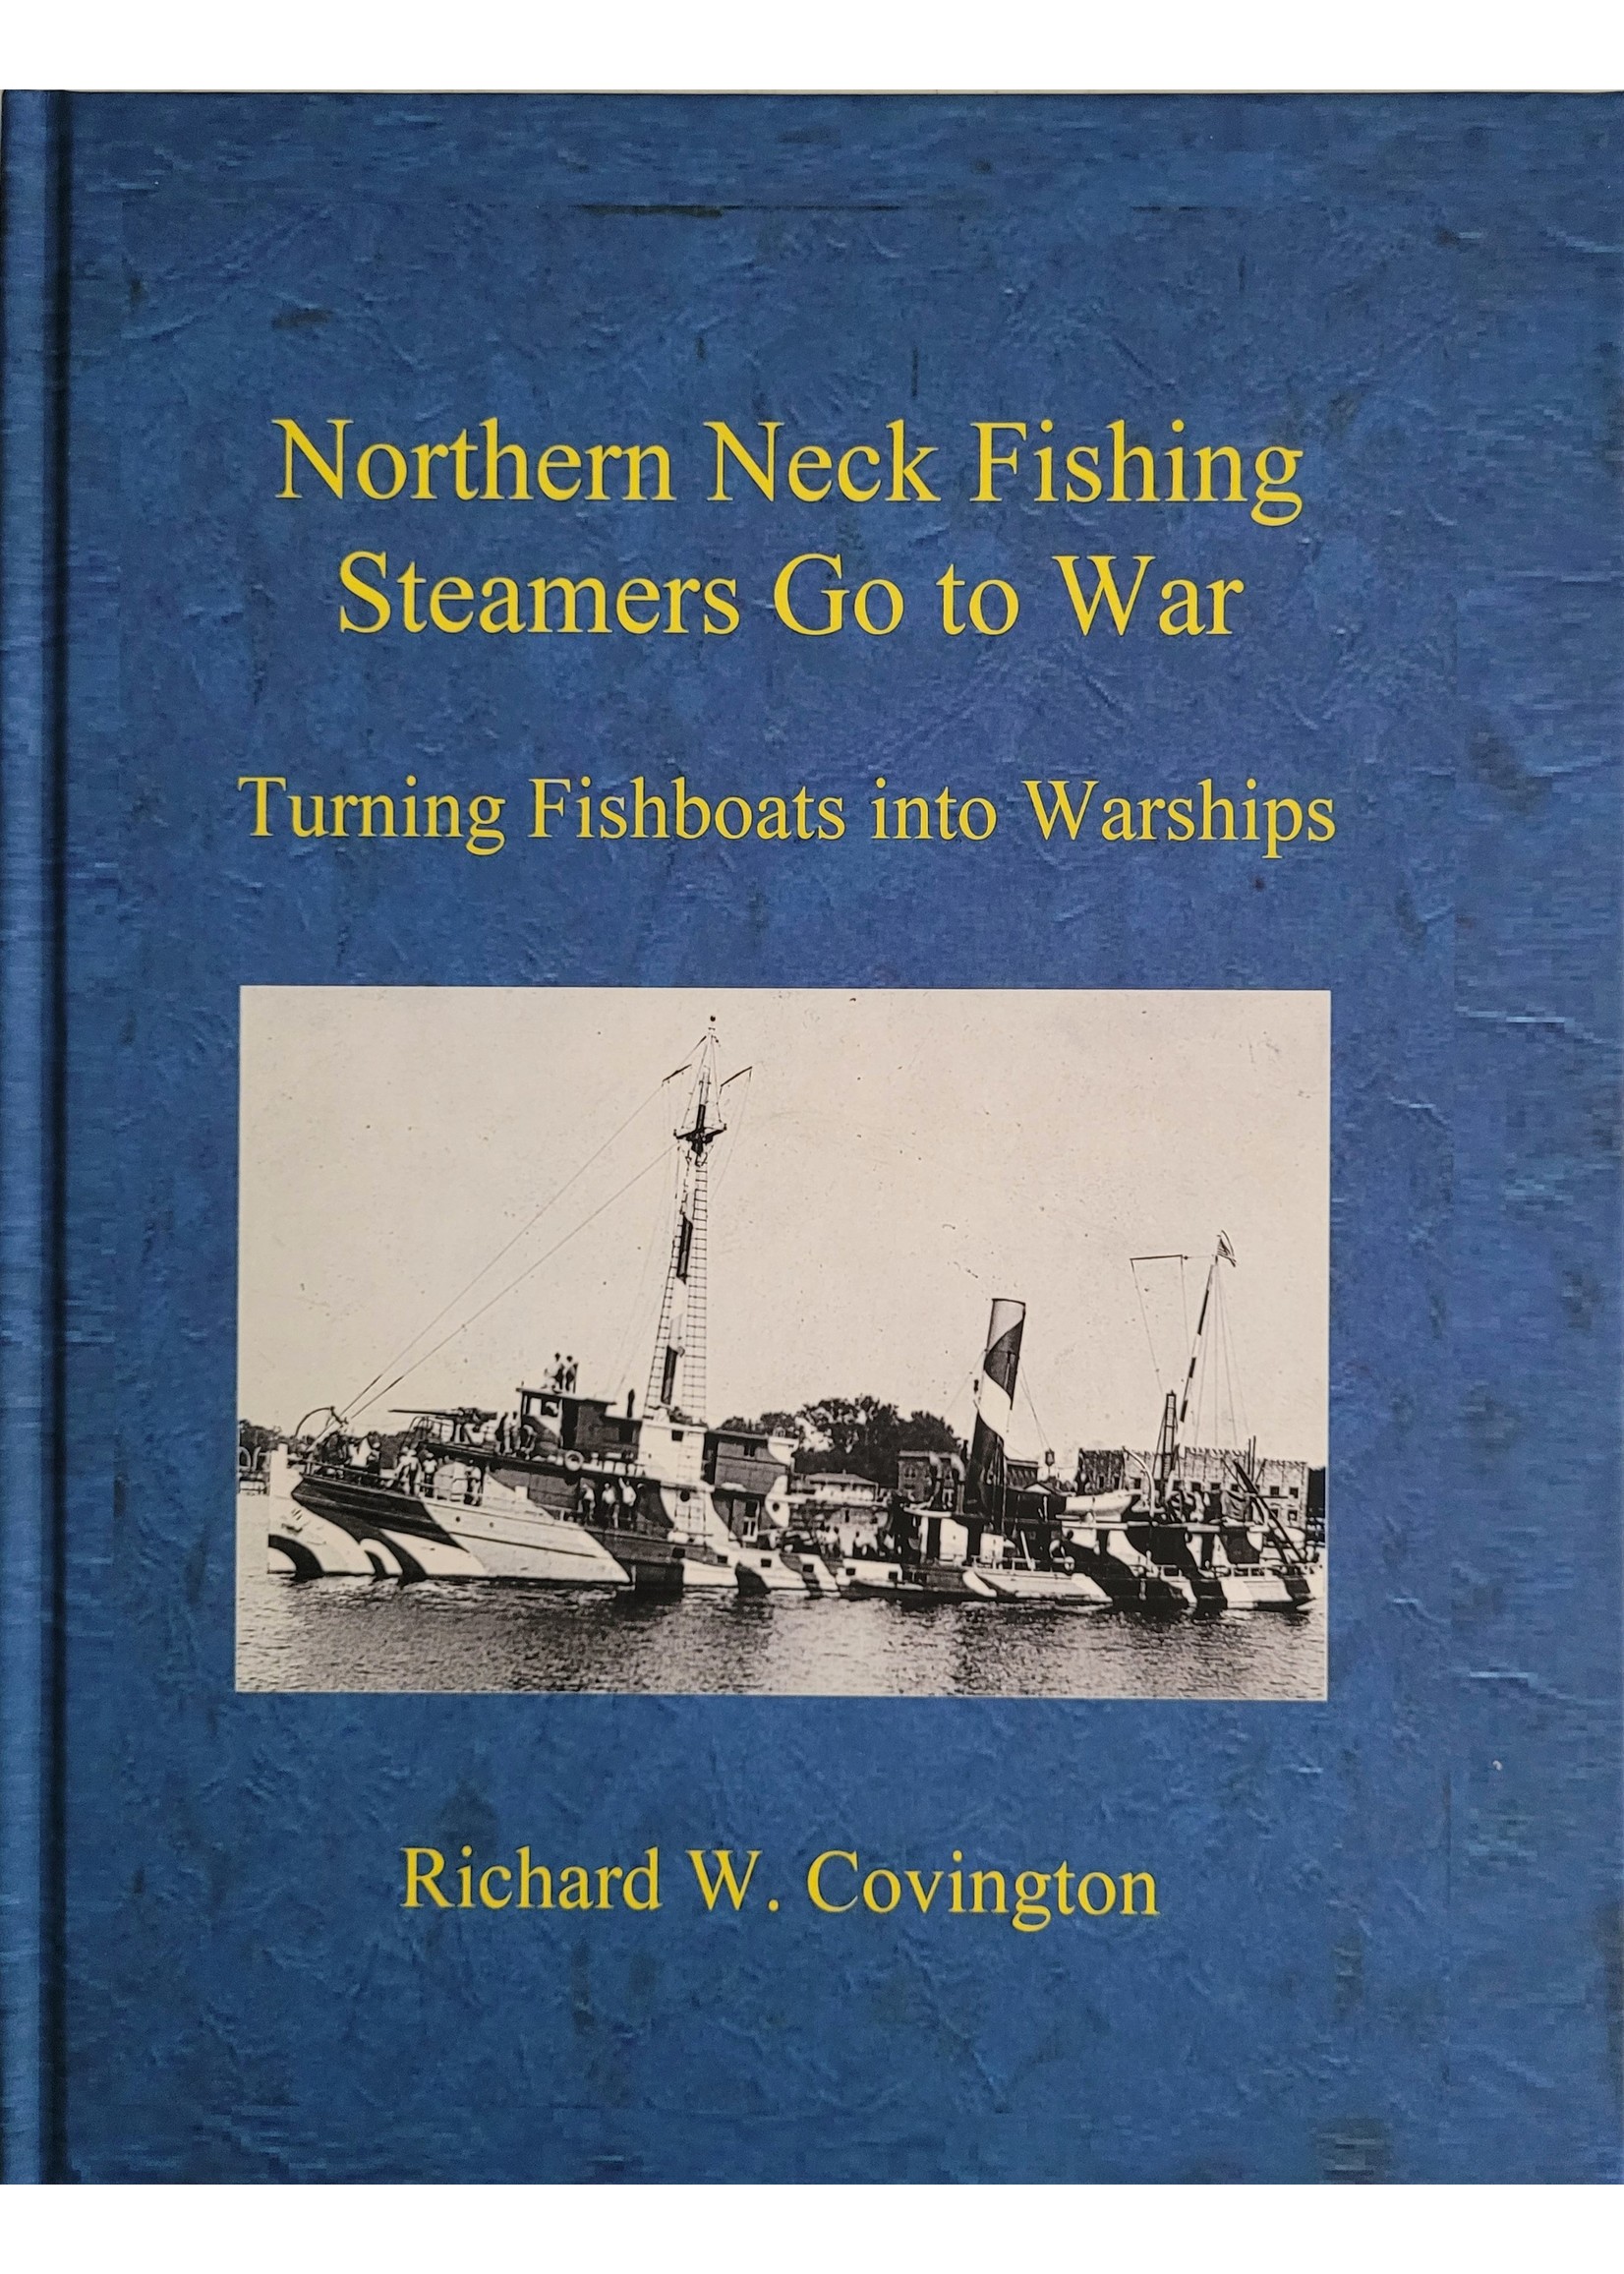 Richard W. Covington Northern Neck Fishing Steamers Go to War - hard cover